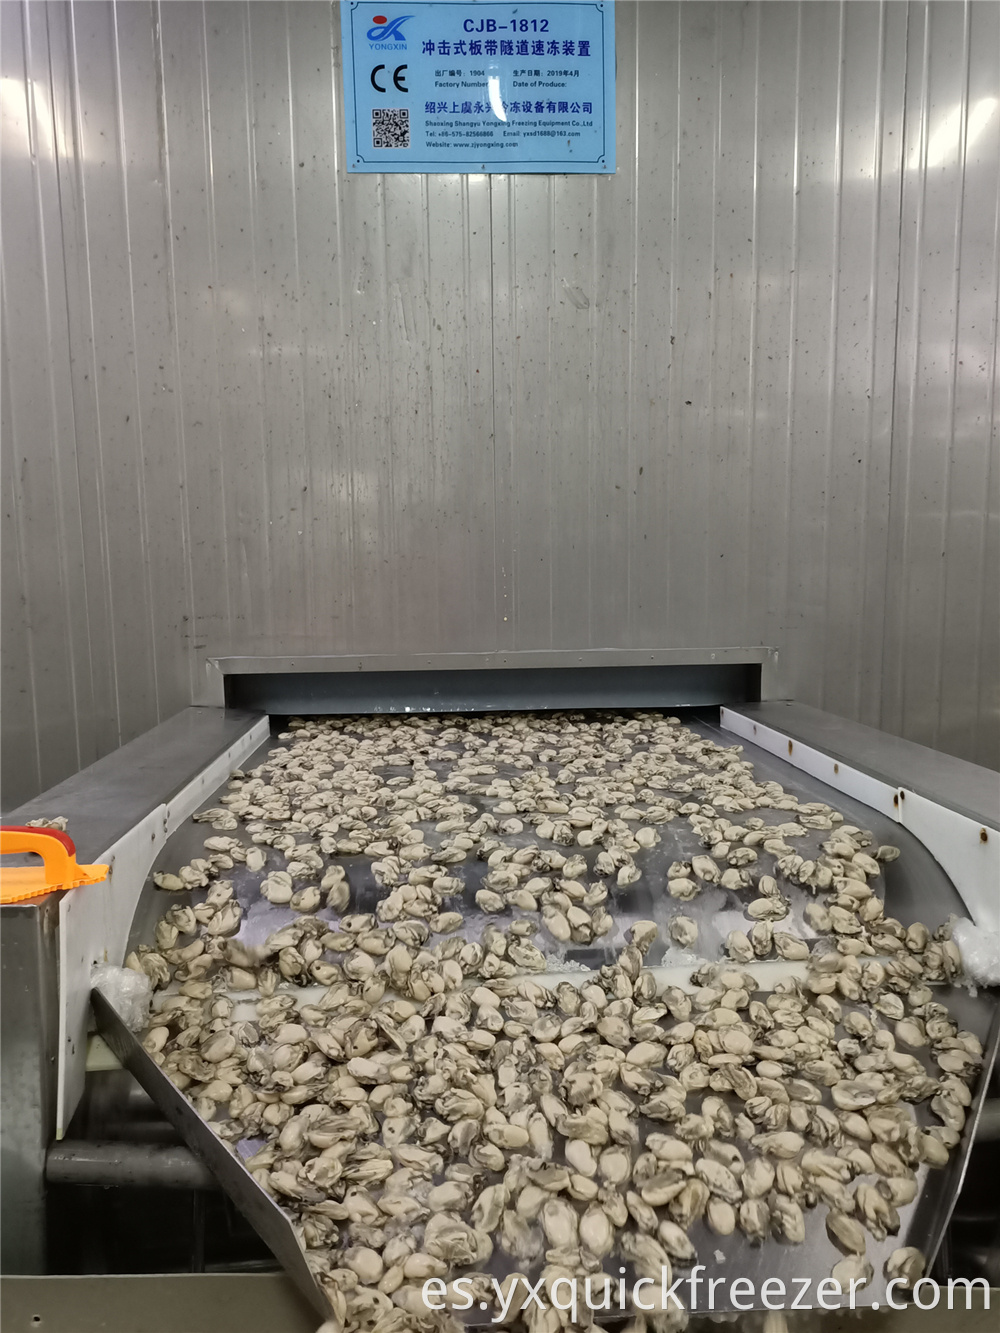 Quick Tunnel Freezer For Iqf Oyster